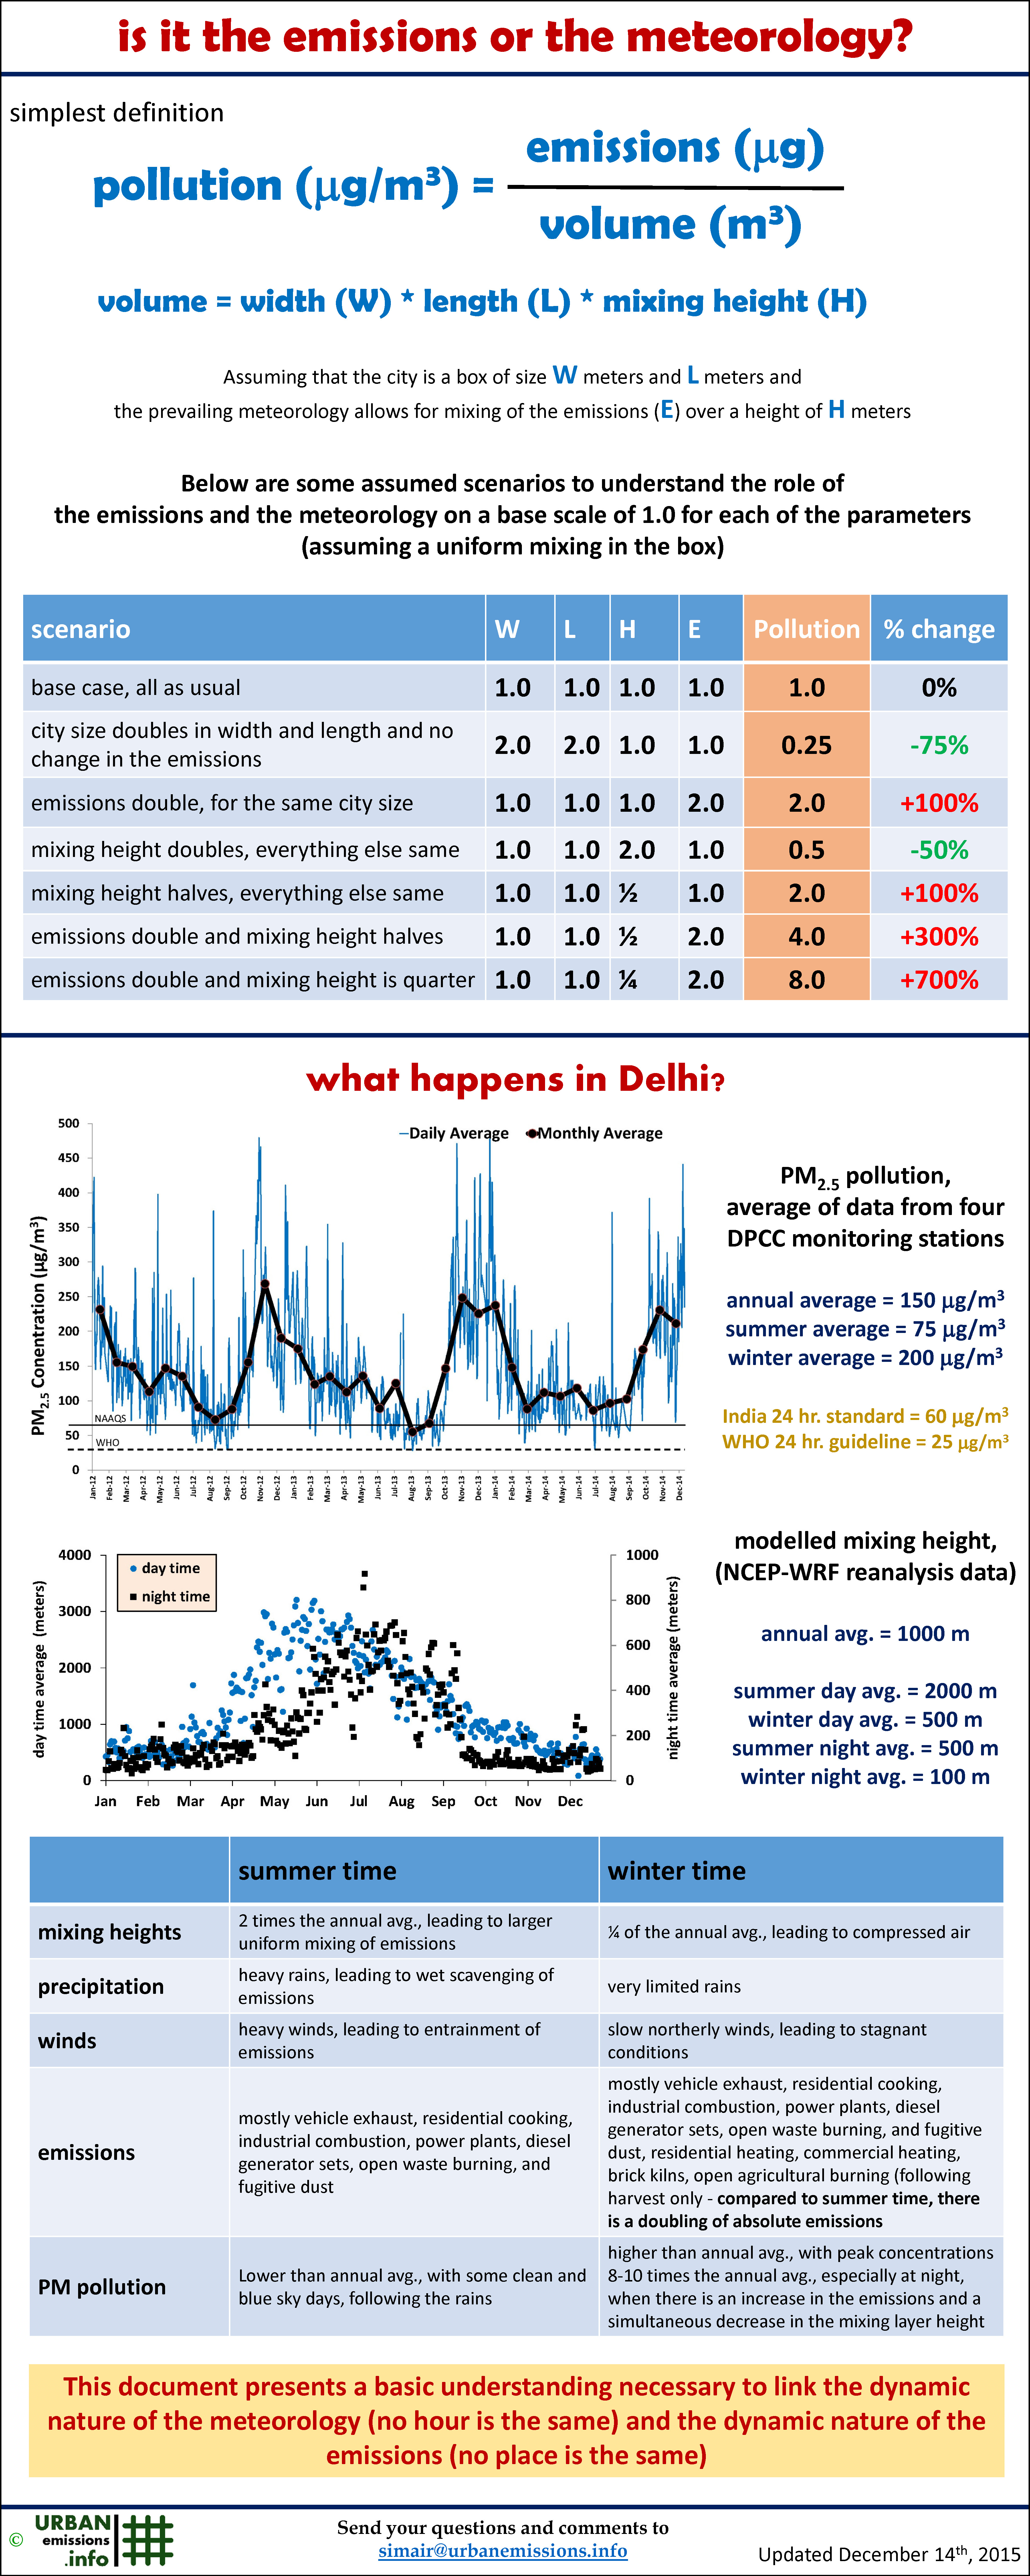 Impact of Emissions and Meteorology on Delhi's Air Quality